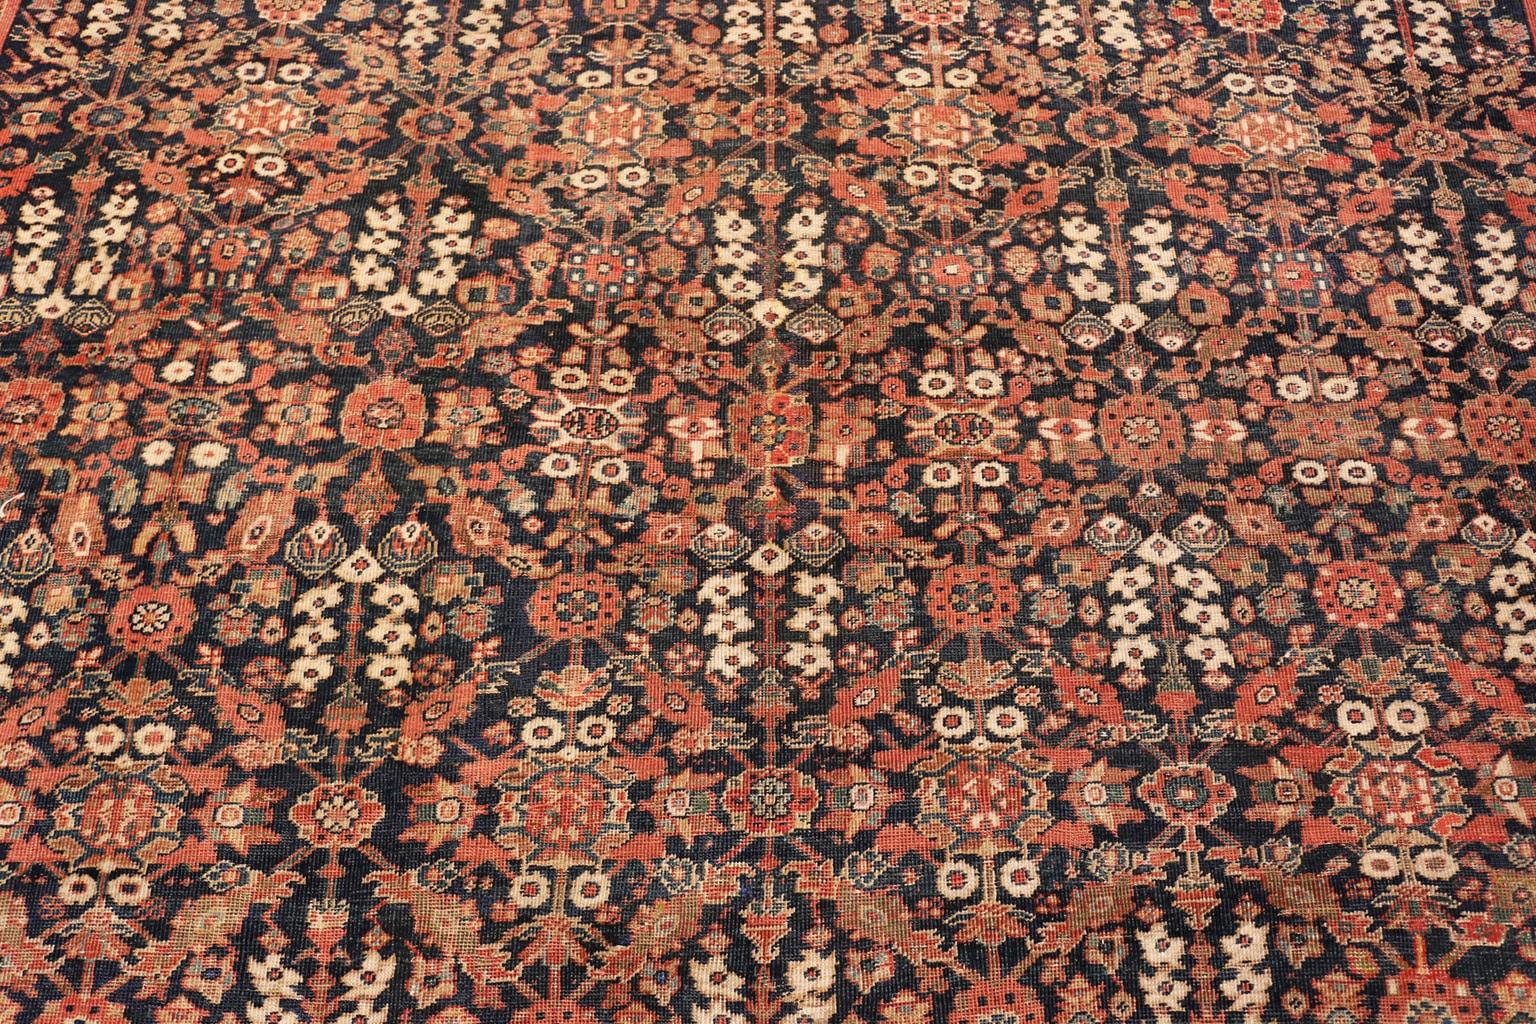 Large room size blue background Persian antique Sultanabad rug, Country of origin: Persia, date circa 1900 - Size: 11 ft x 13 ft 4 in (3.35 m x 4.06 m). Like so many other gorgeous antique Persian Sultanabad Rugs, this beautiful piece creates a